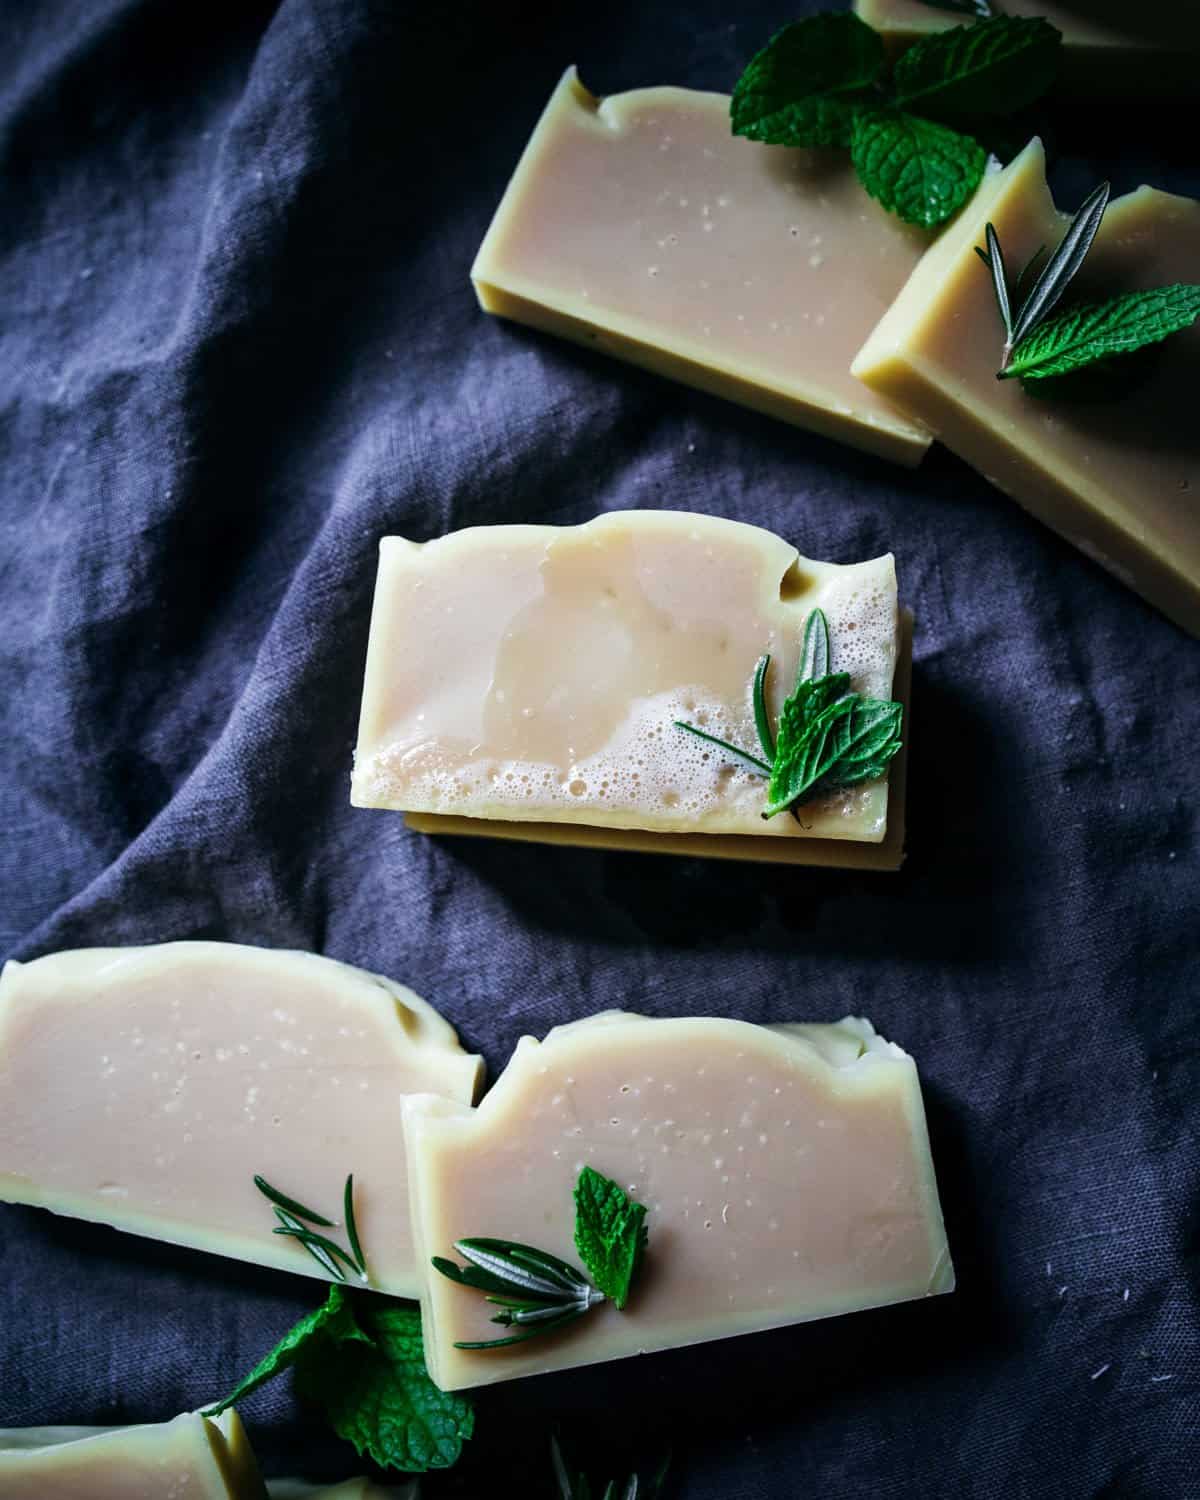 finished shampoo bars with rosemary and mint